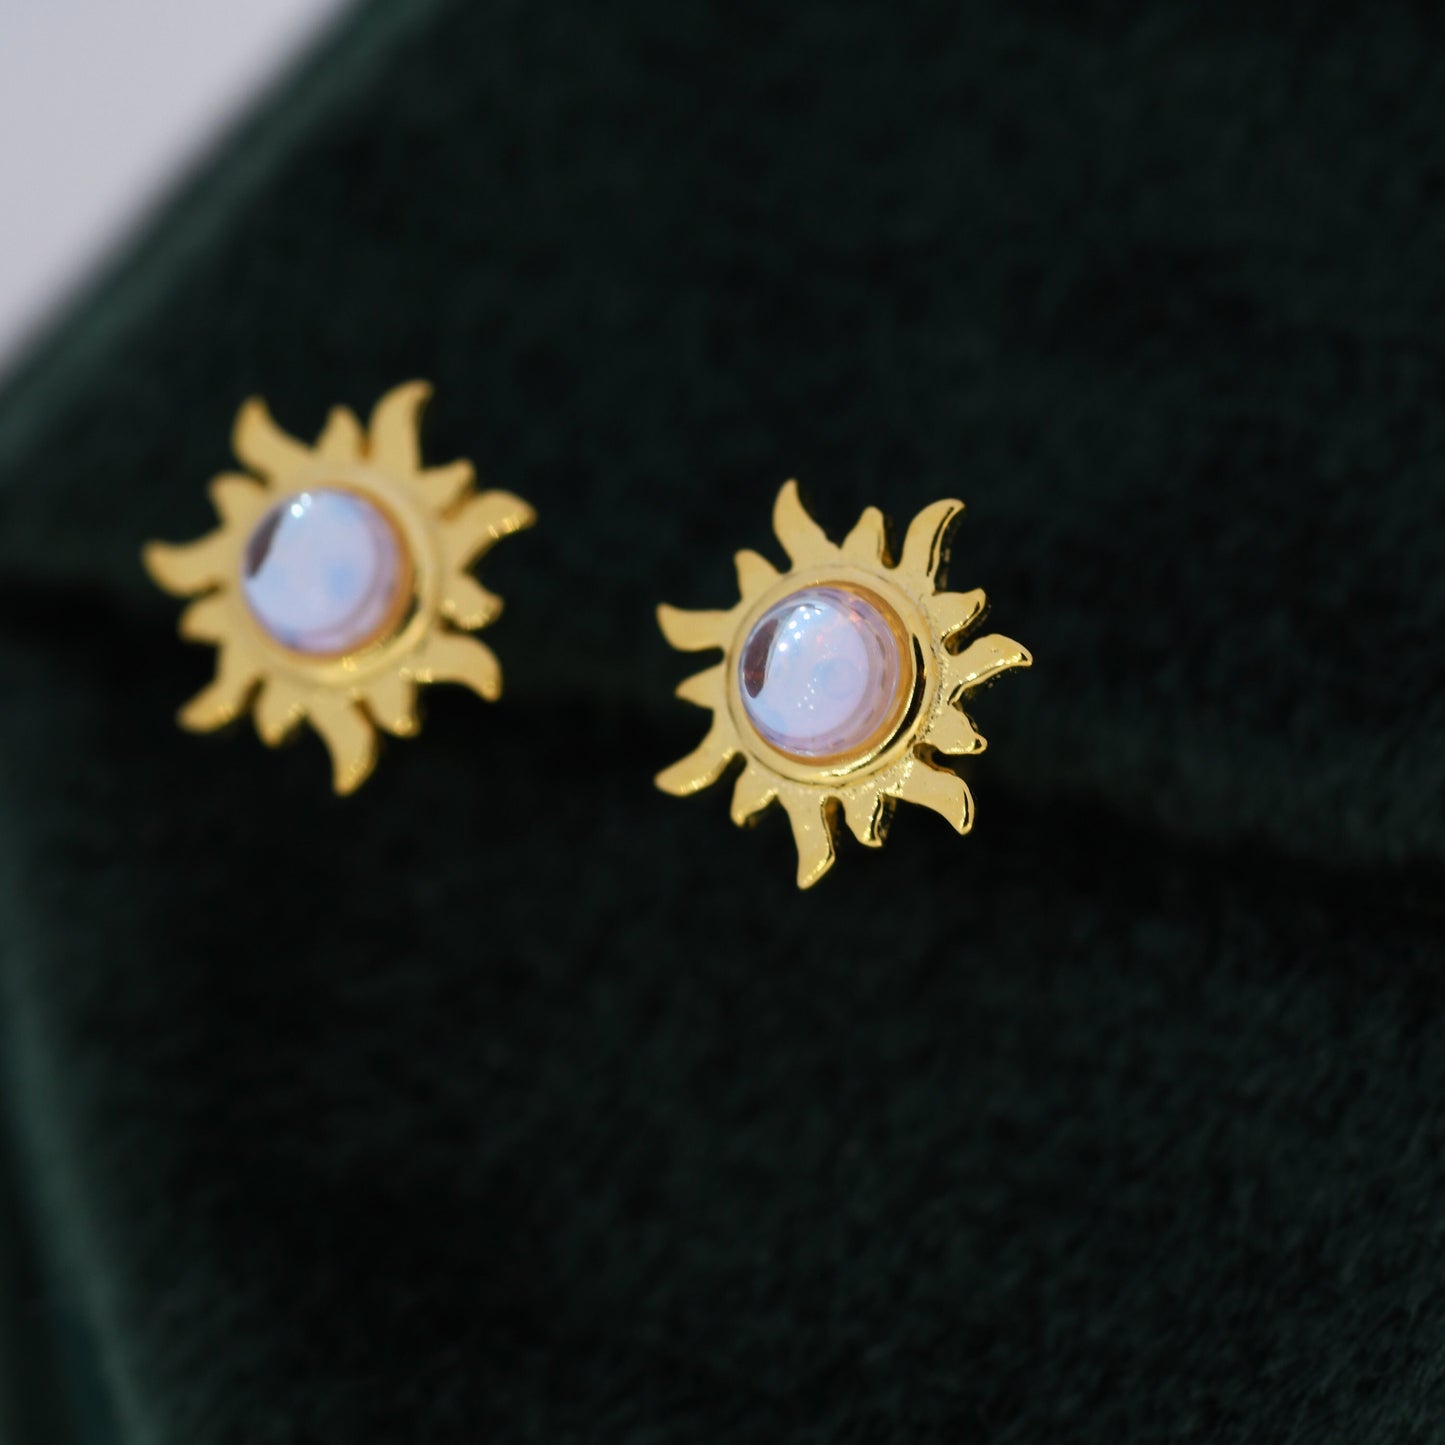 Tiny Sun Stud Earrings in Sterling Silver with Simulated Moonstone, Silver or Gold,  Sun Earrings, Celestial Earrings